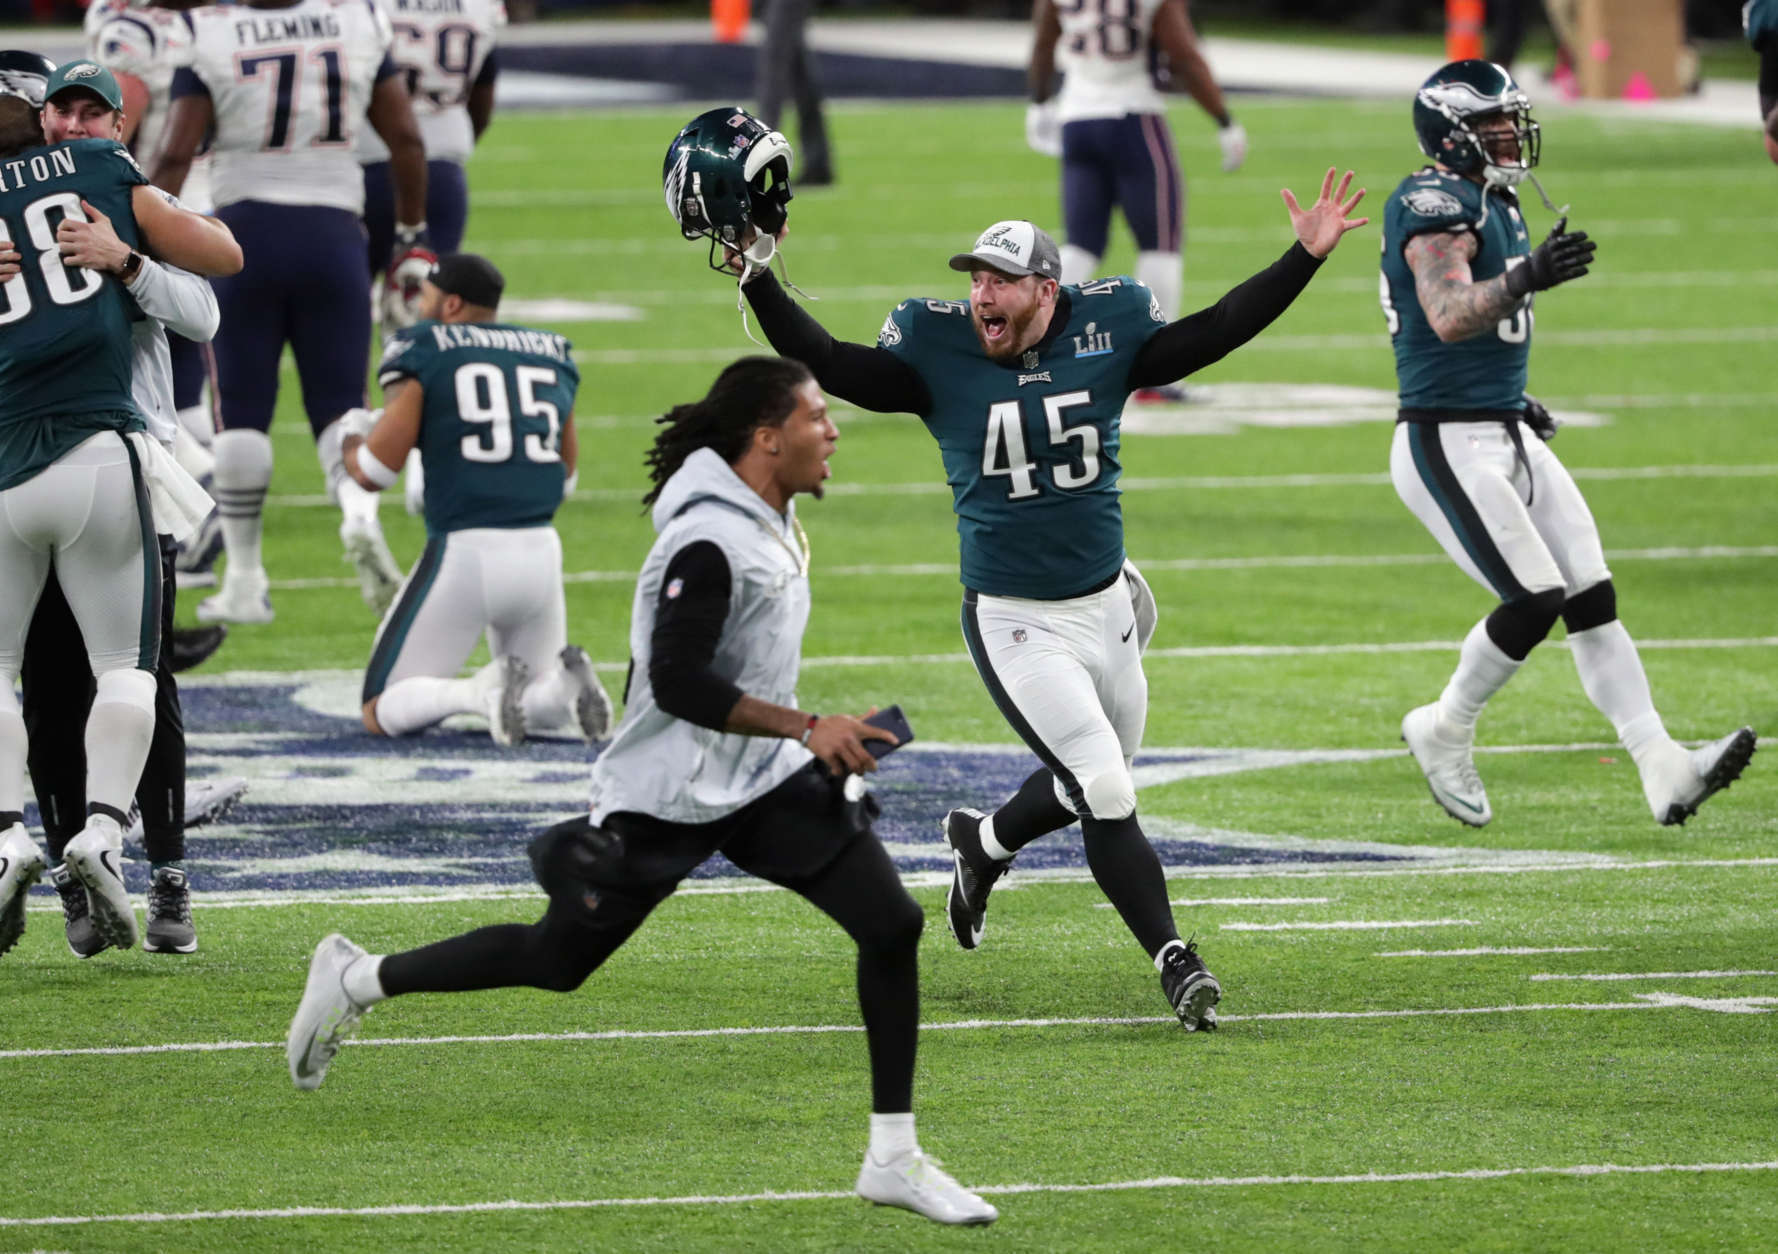 MINNEAPOLIS, MN - FEBRUARY 04:  Rick Lovato #45 of the Philadelphia Eagles runs on the field after defeating the New England Patriots in Super Bowl LII at U.S. Bank Stadium on February 4, 2018 in Minneapolis, Minnesota. The Philadelphia Eagles defeated the New England Patriots 41-33.  (Photo by Streeter Lecka/Getty Images)